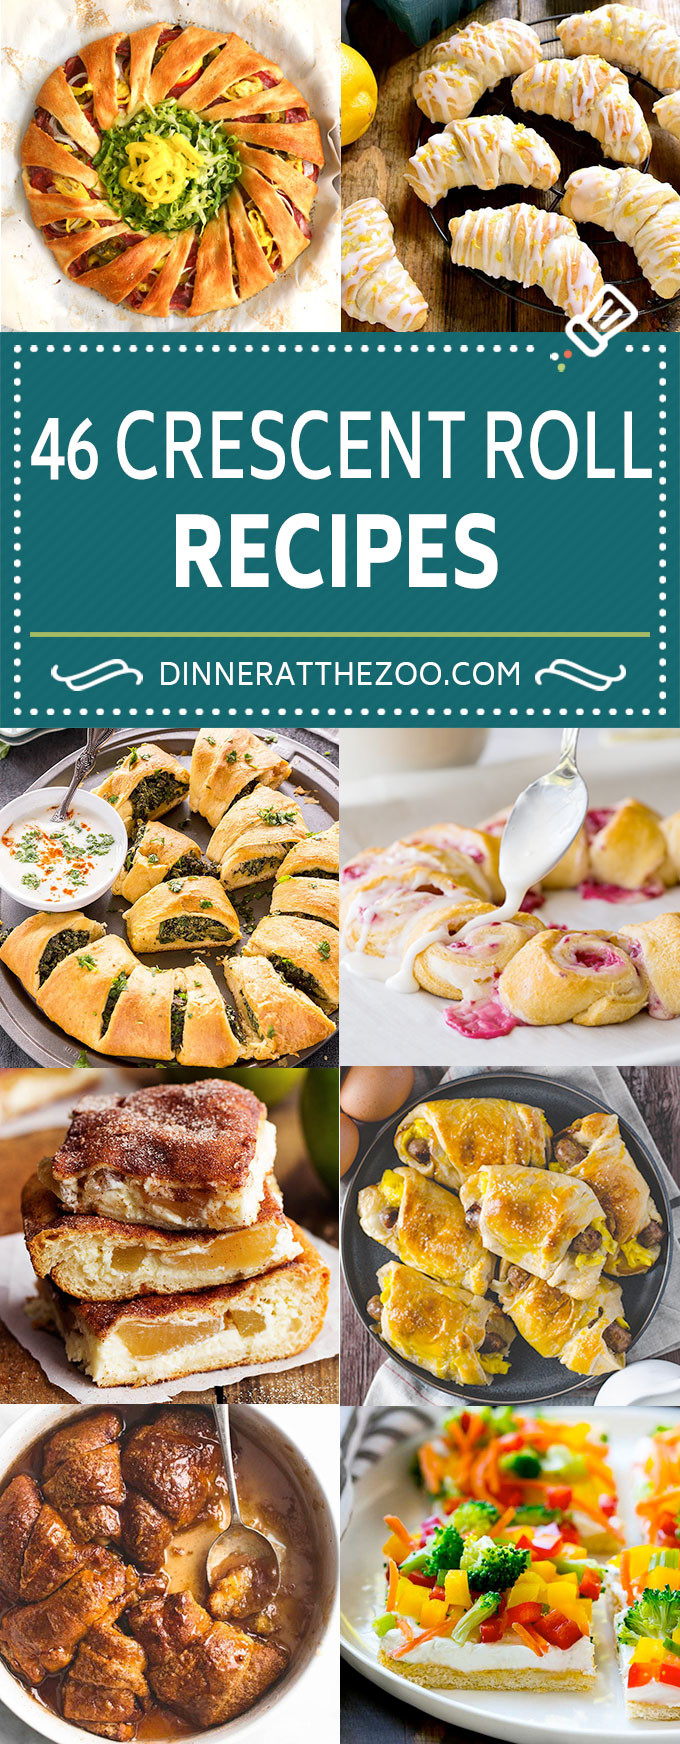 Appetizers Using Crescent Rolls
 46 Crescent Roll Recipes Dinner at the Zoo